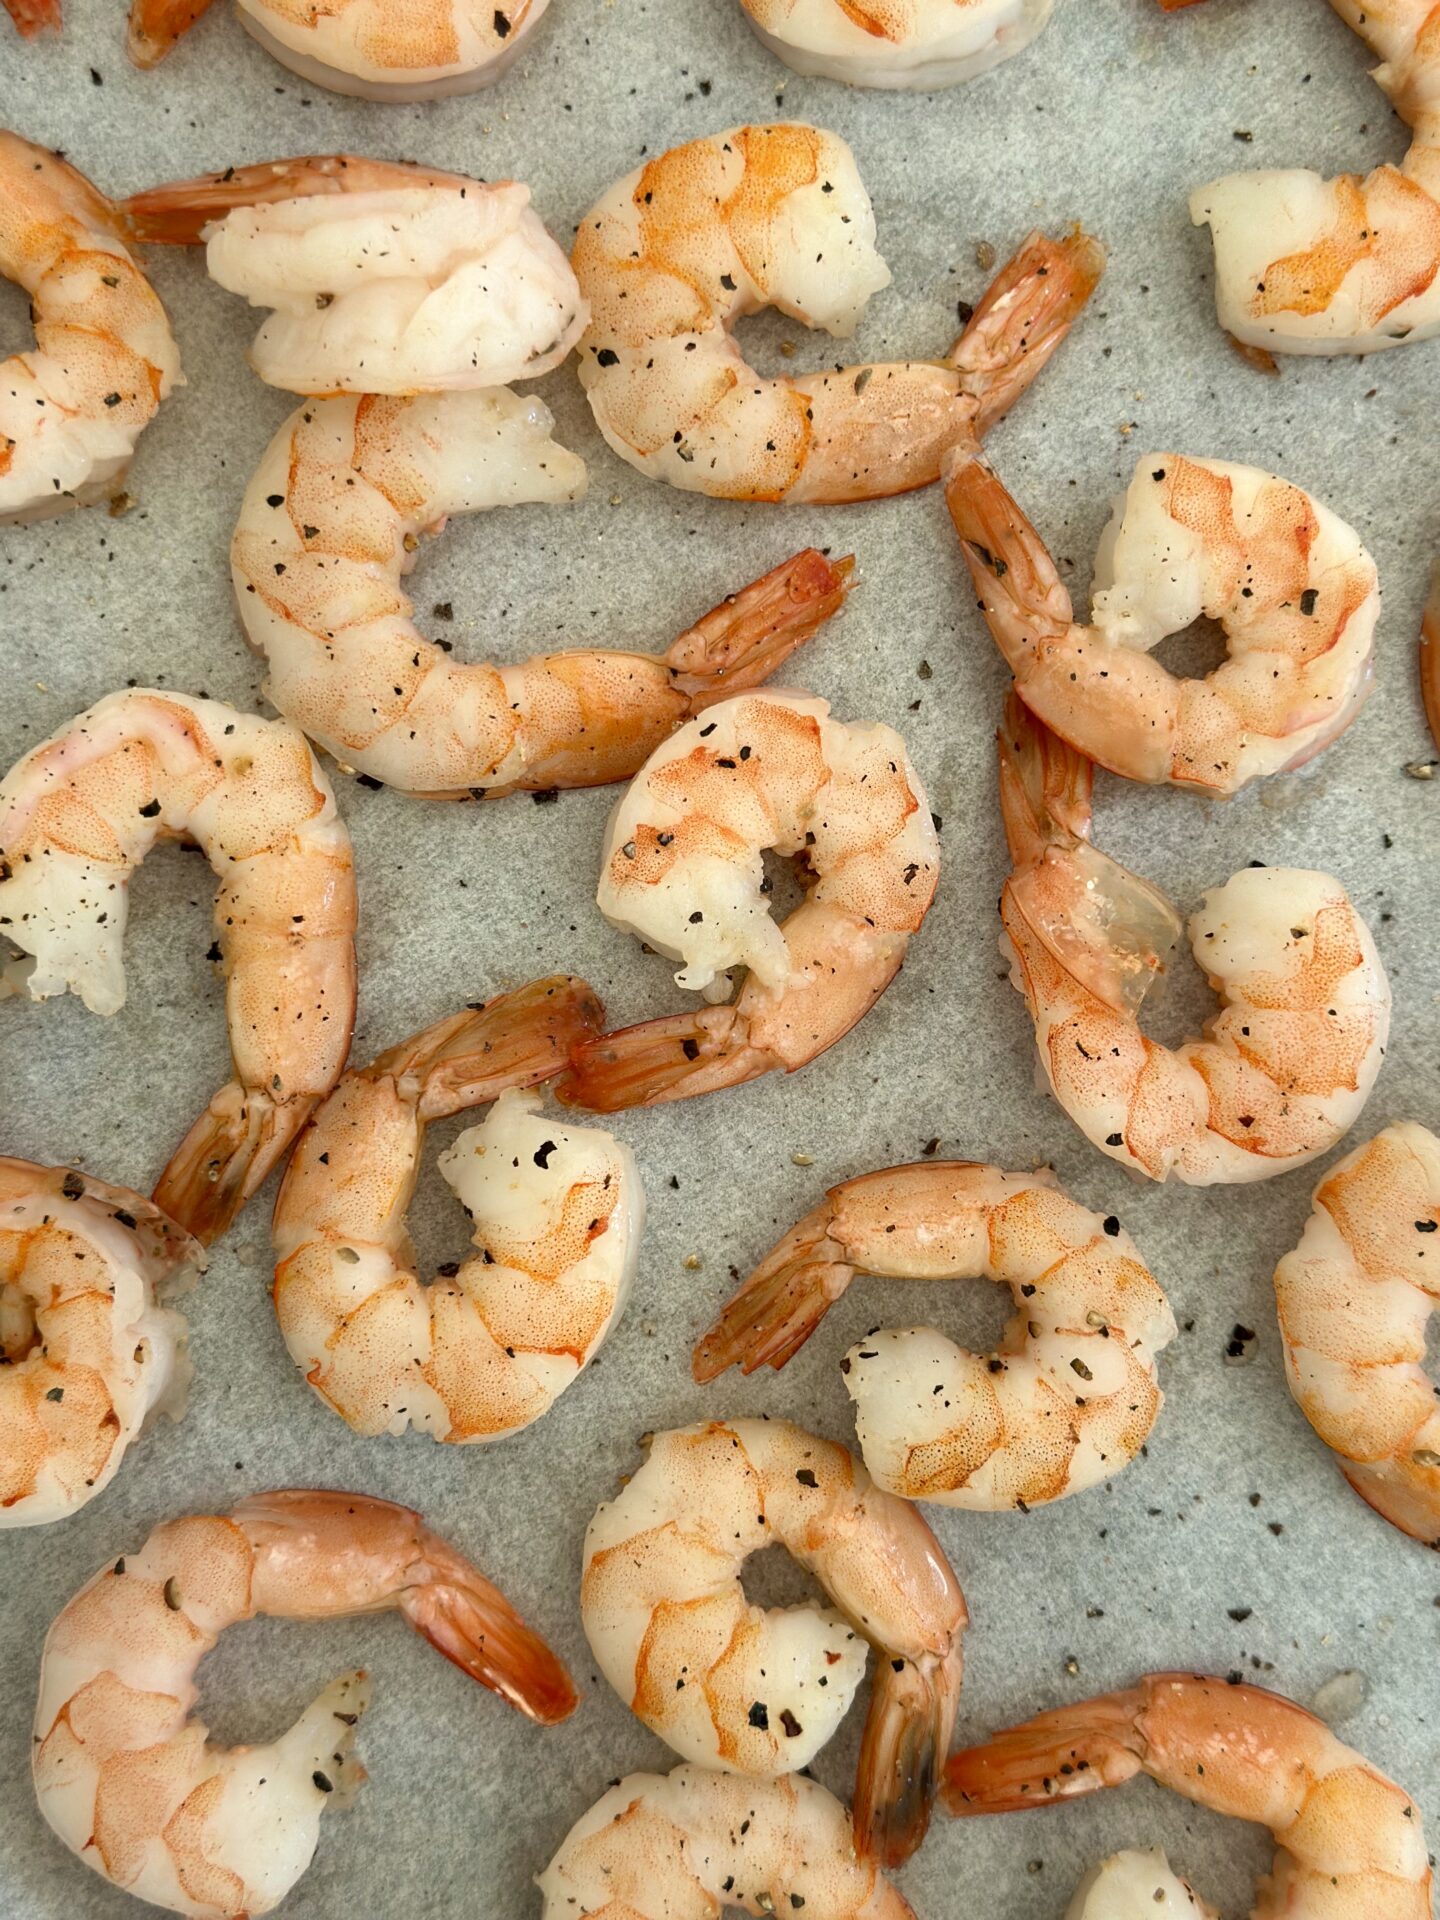 Roasted shrimp are seen from above on a baking sheet